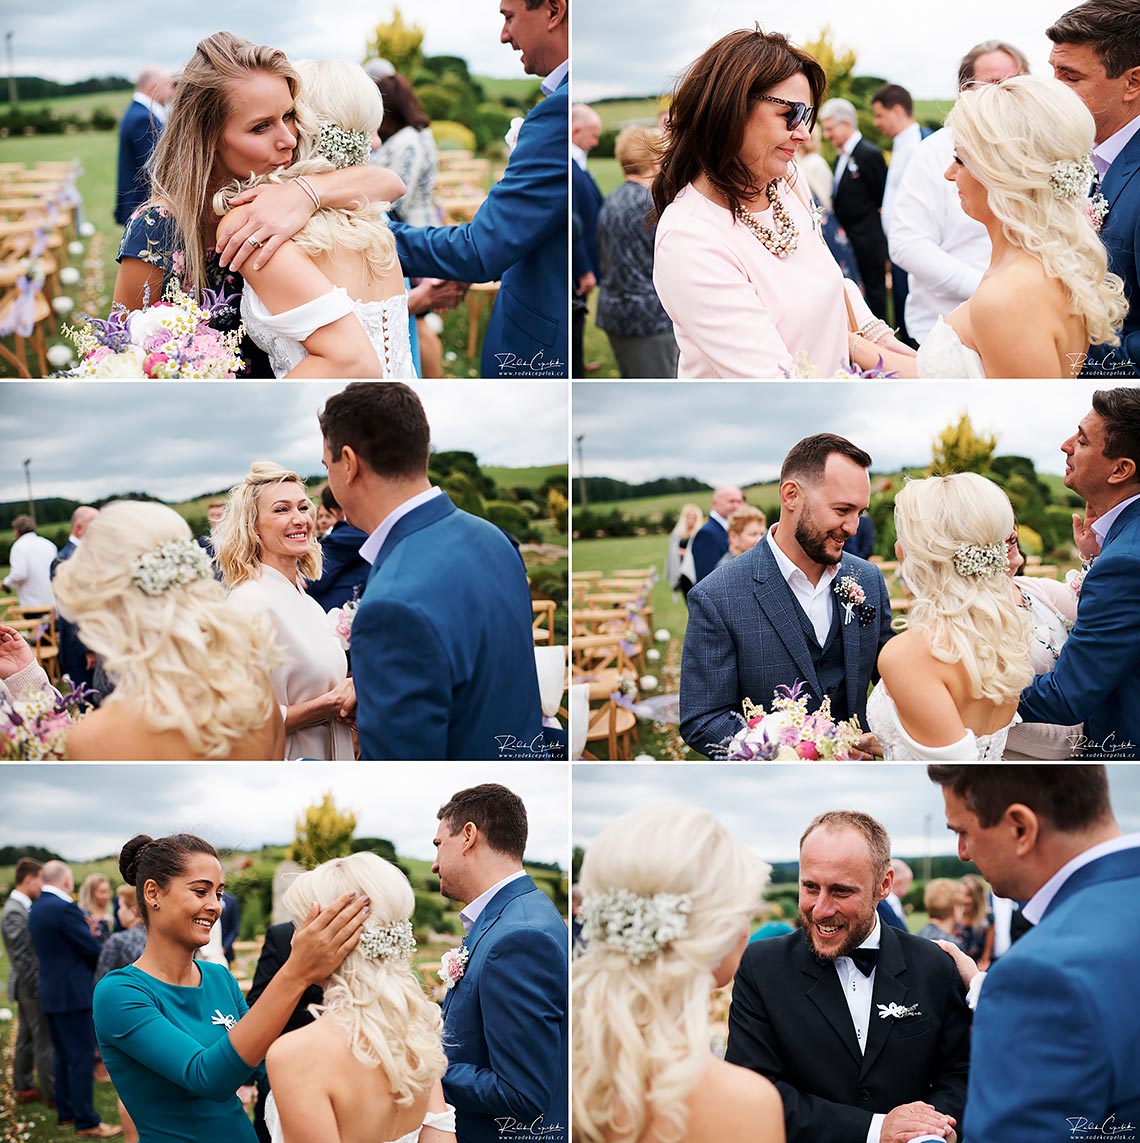 Guest congratulate to groom and bride after wedding ceremony